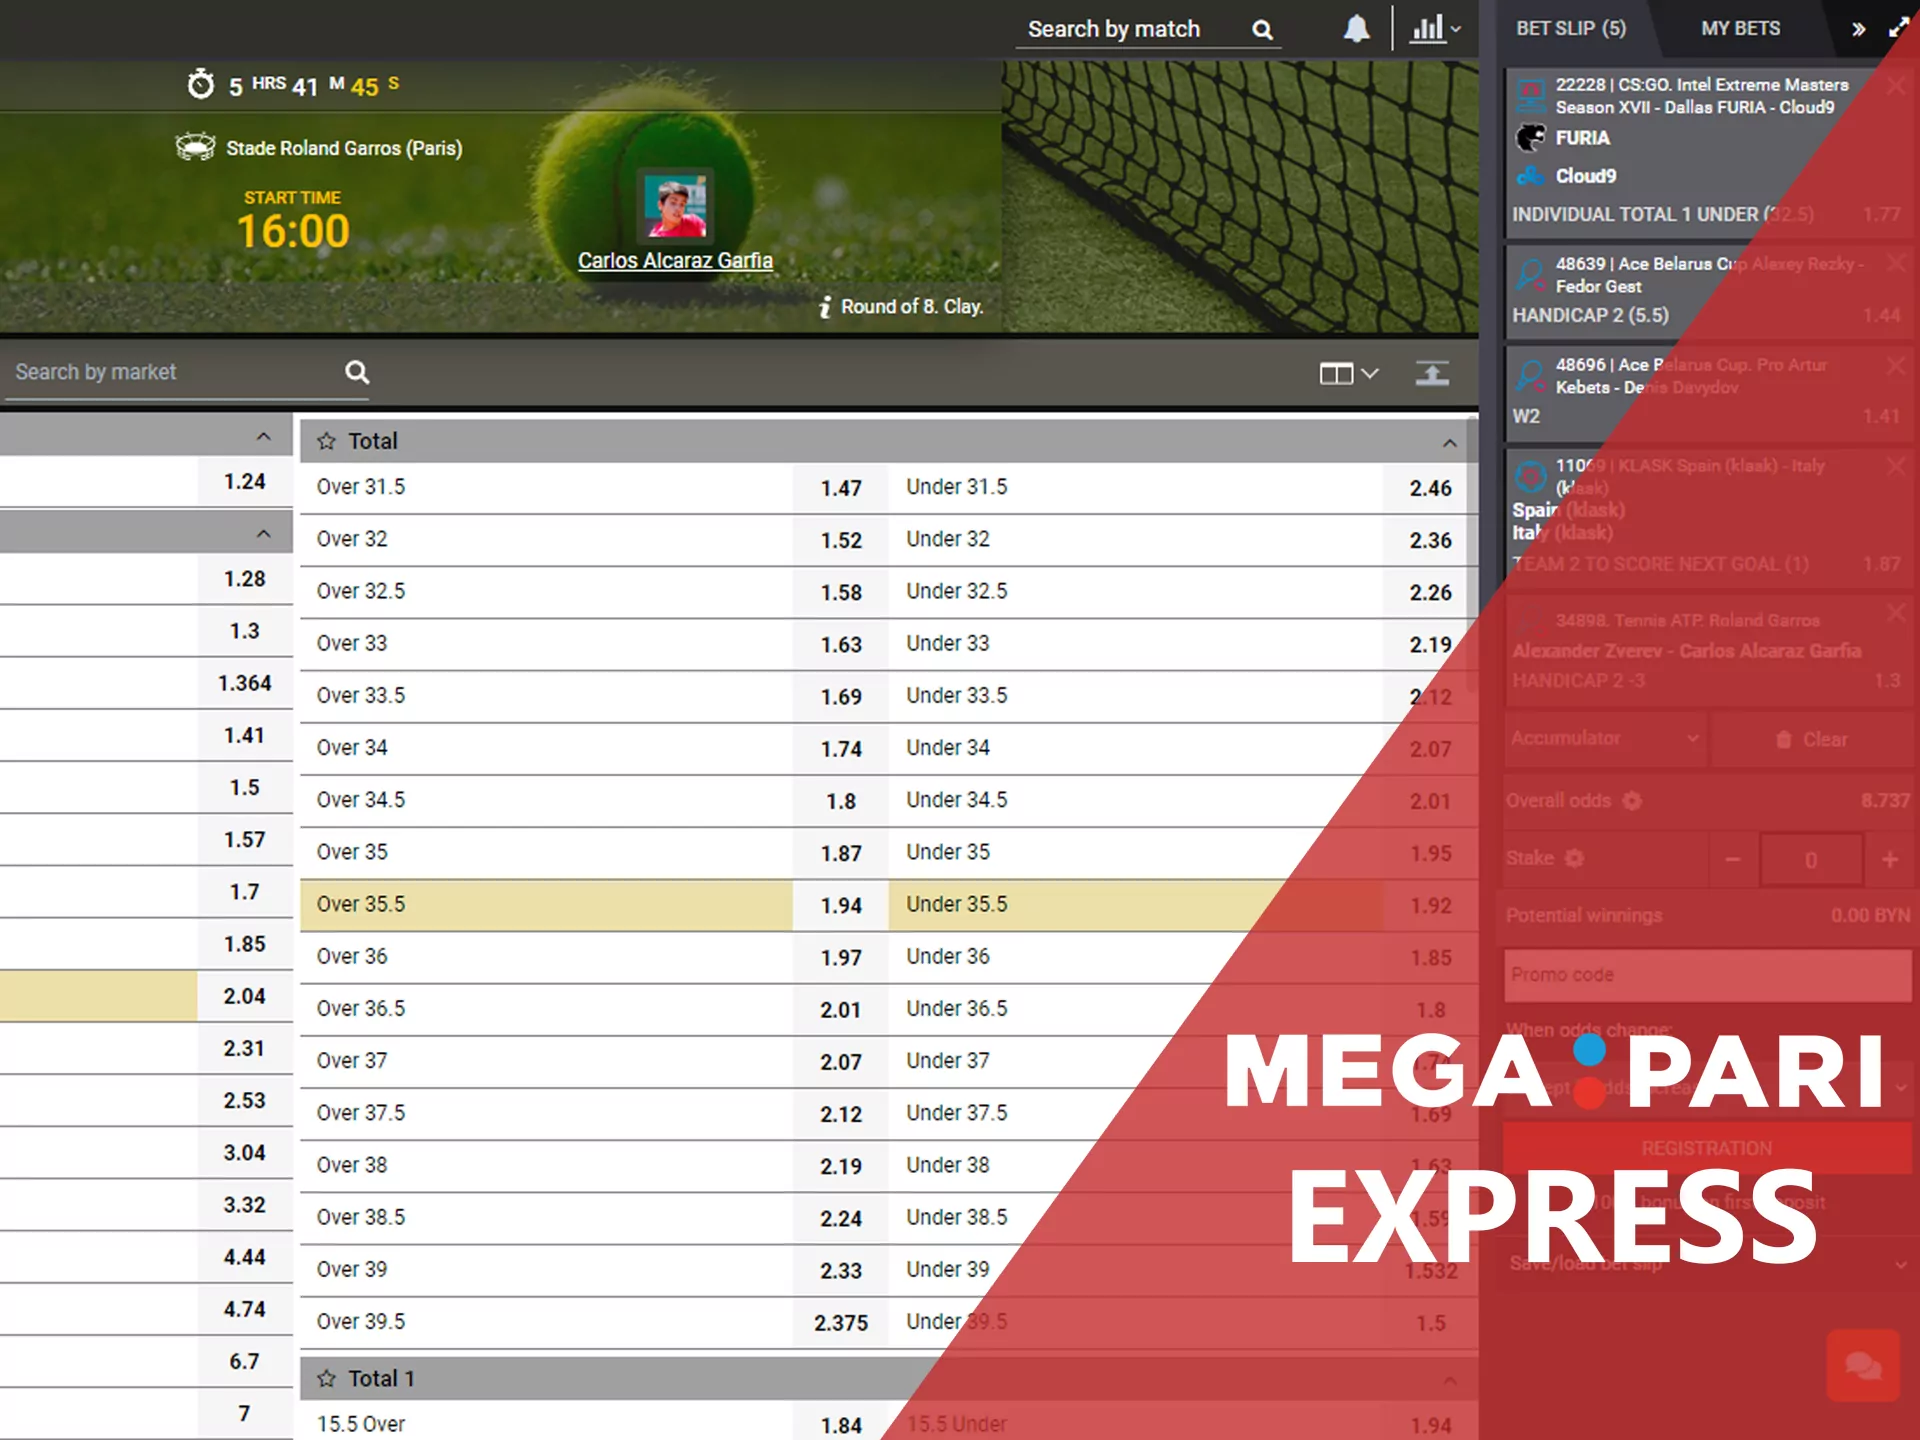 Express bet is the most preferrable for big winnings.